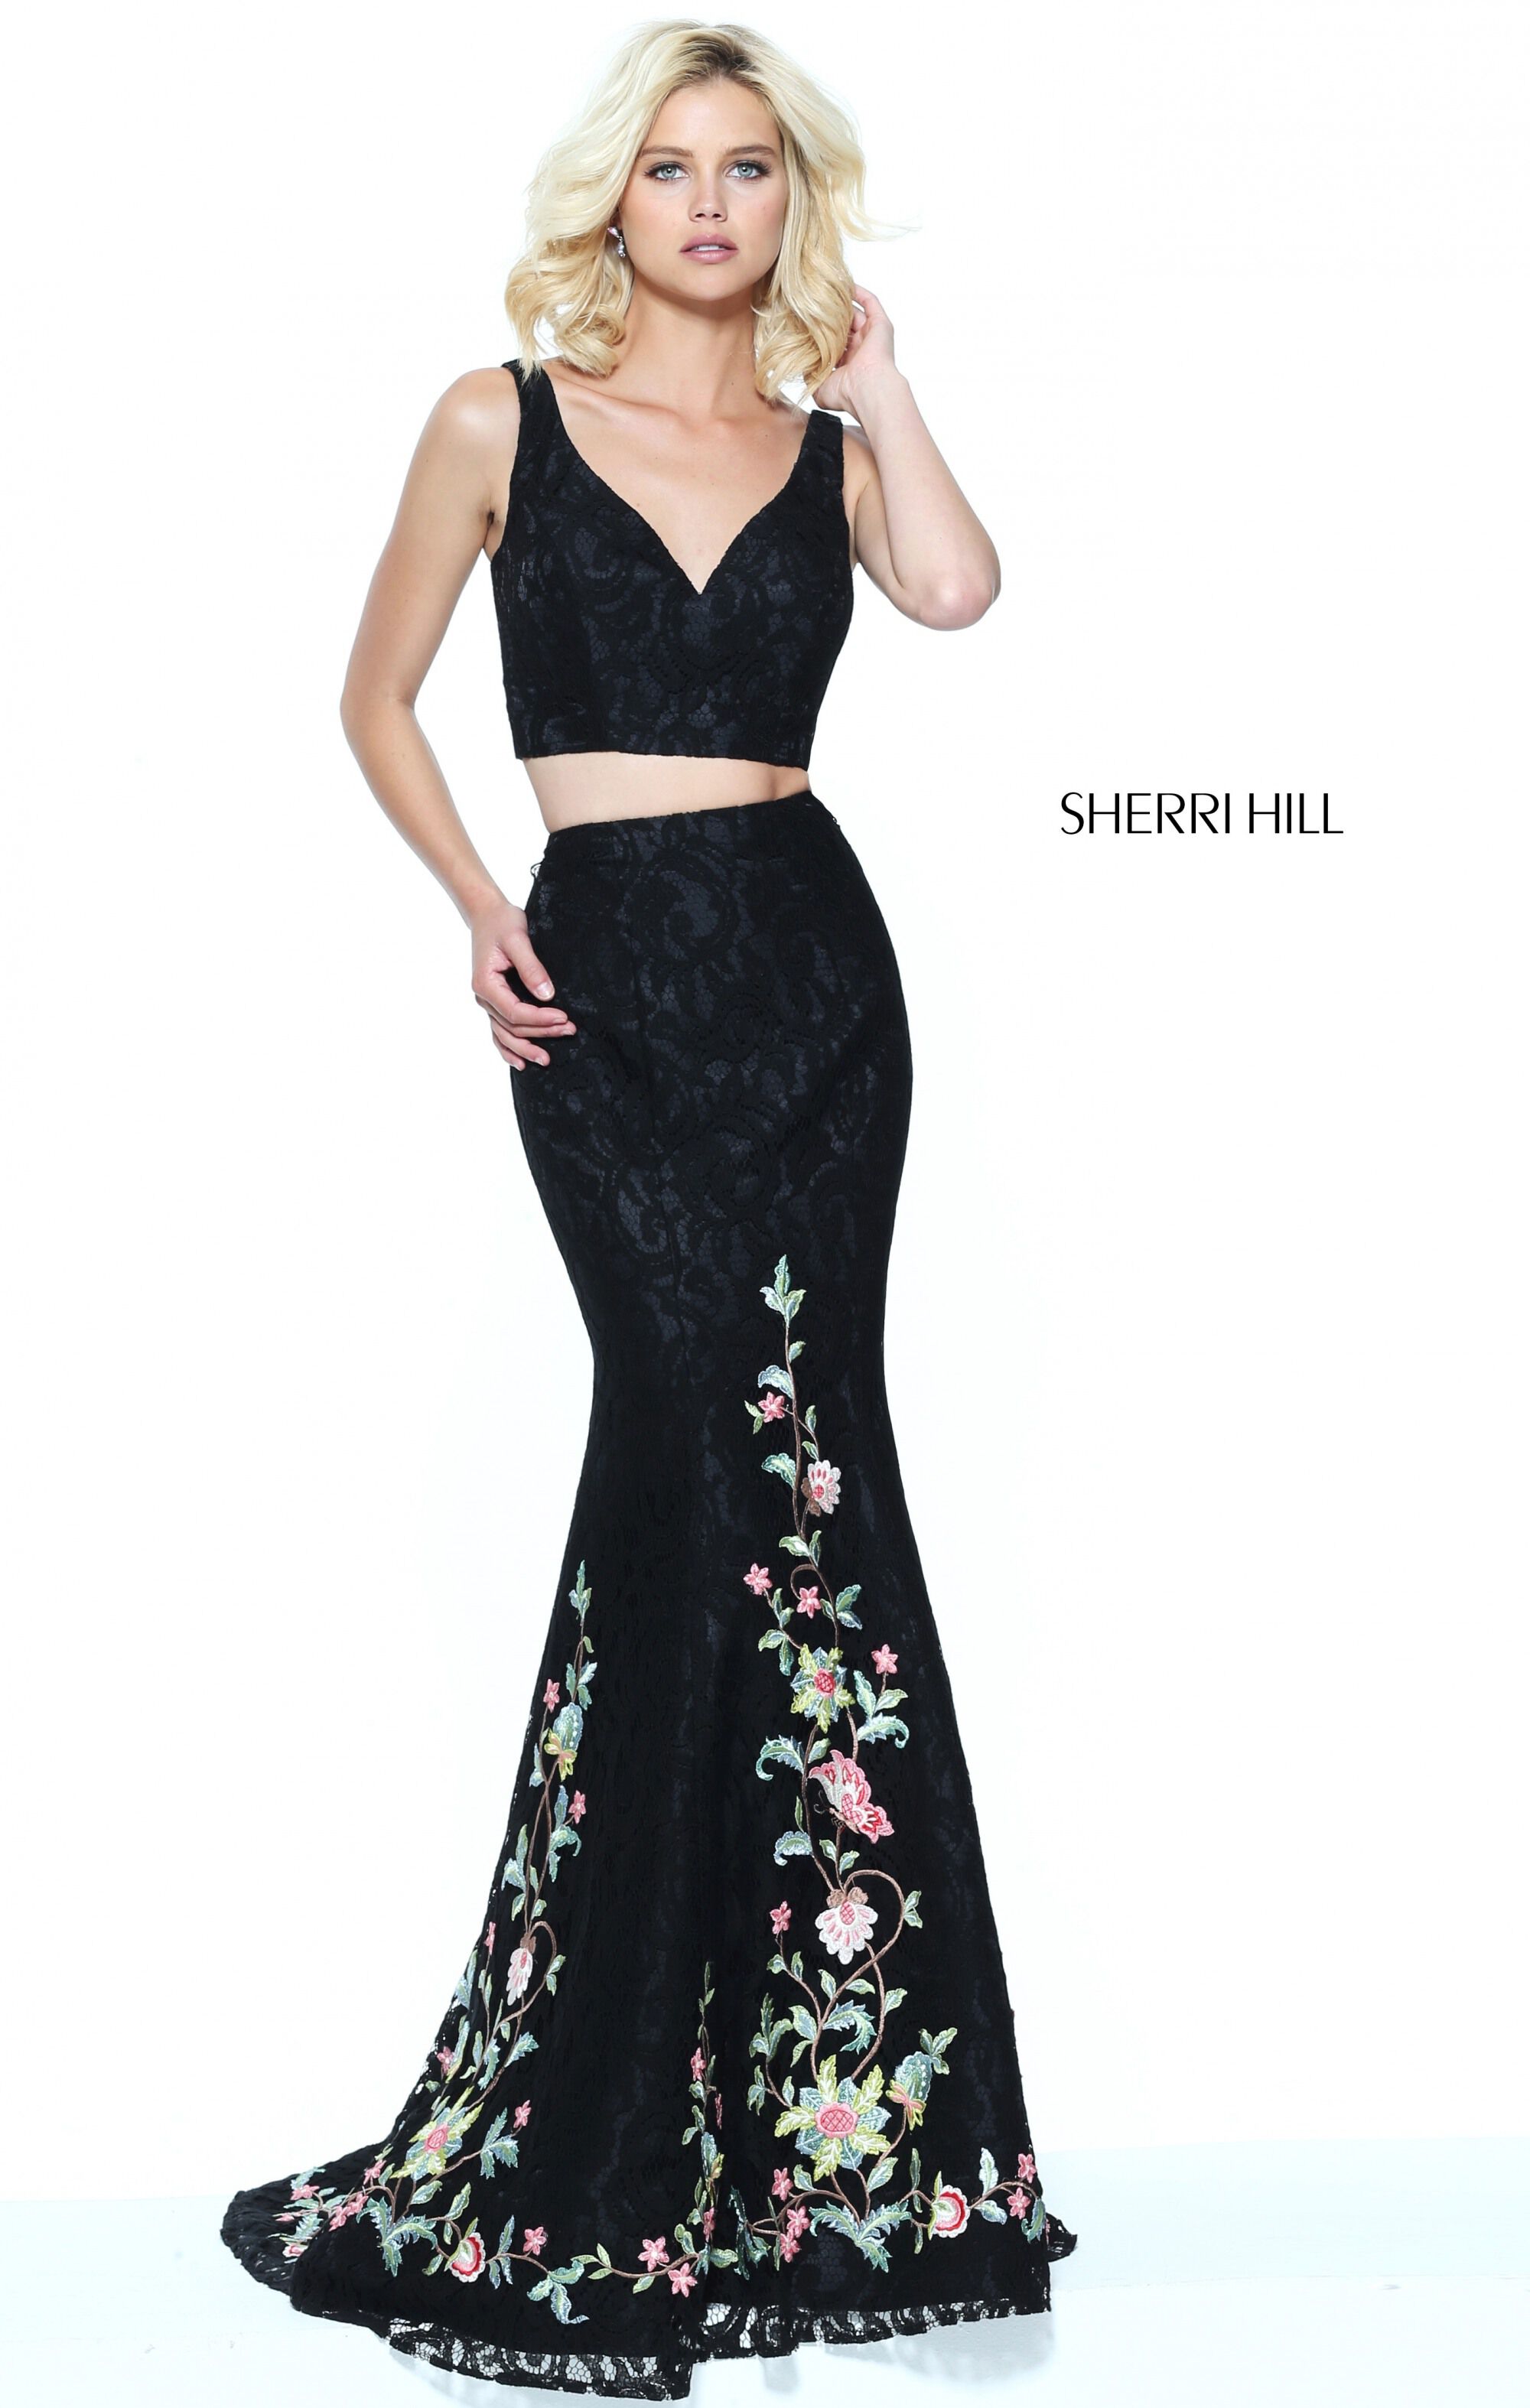 style № 50778 designed by SherriHill